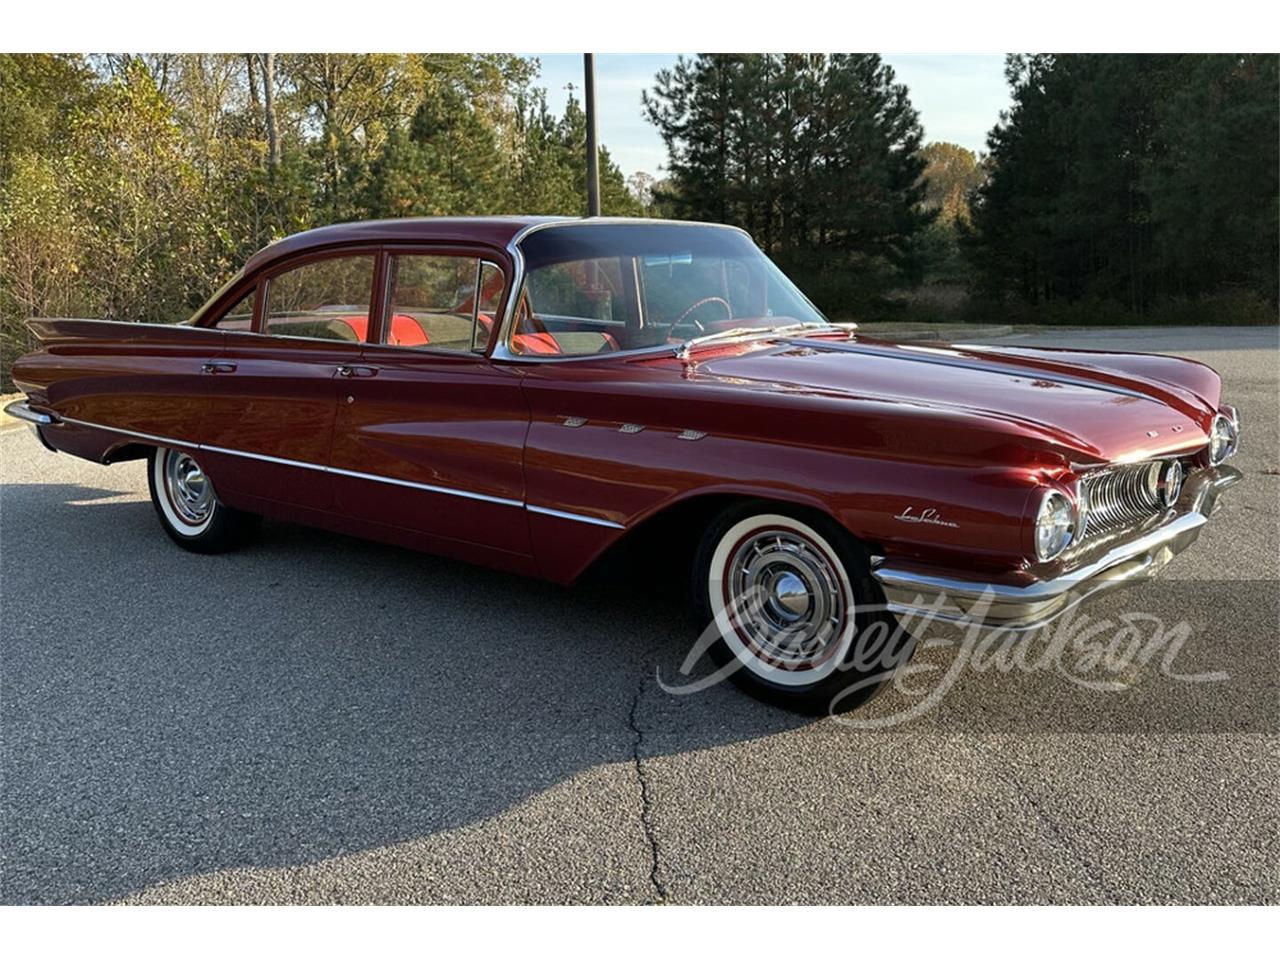 For Sale at Auction: 1960 Buick LeSabre in Scottsdale, Arizona for sale in Scottsdale, AZ